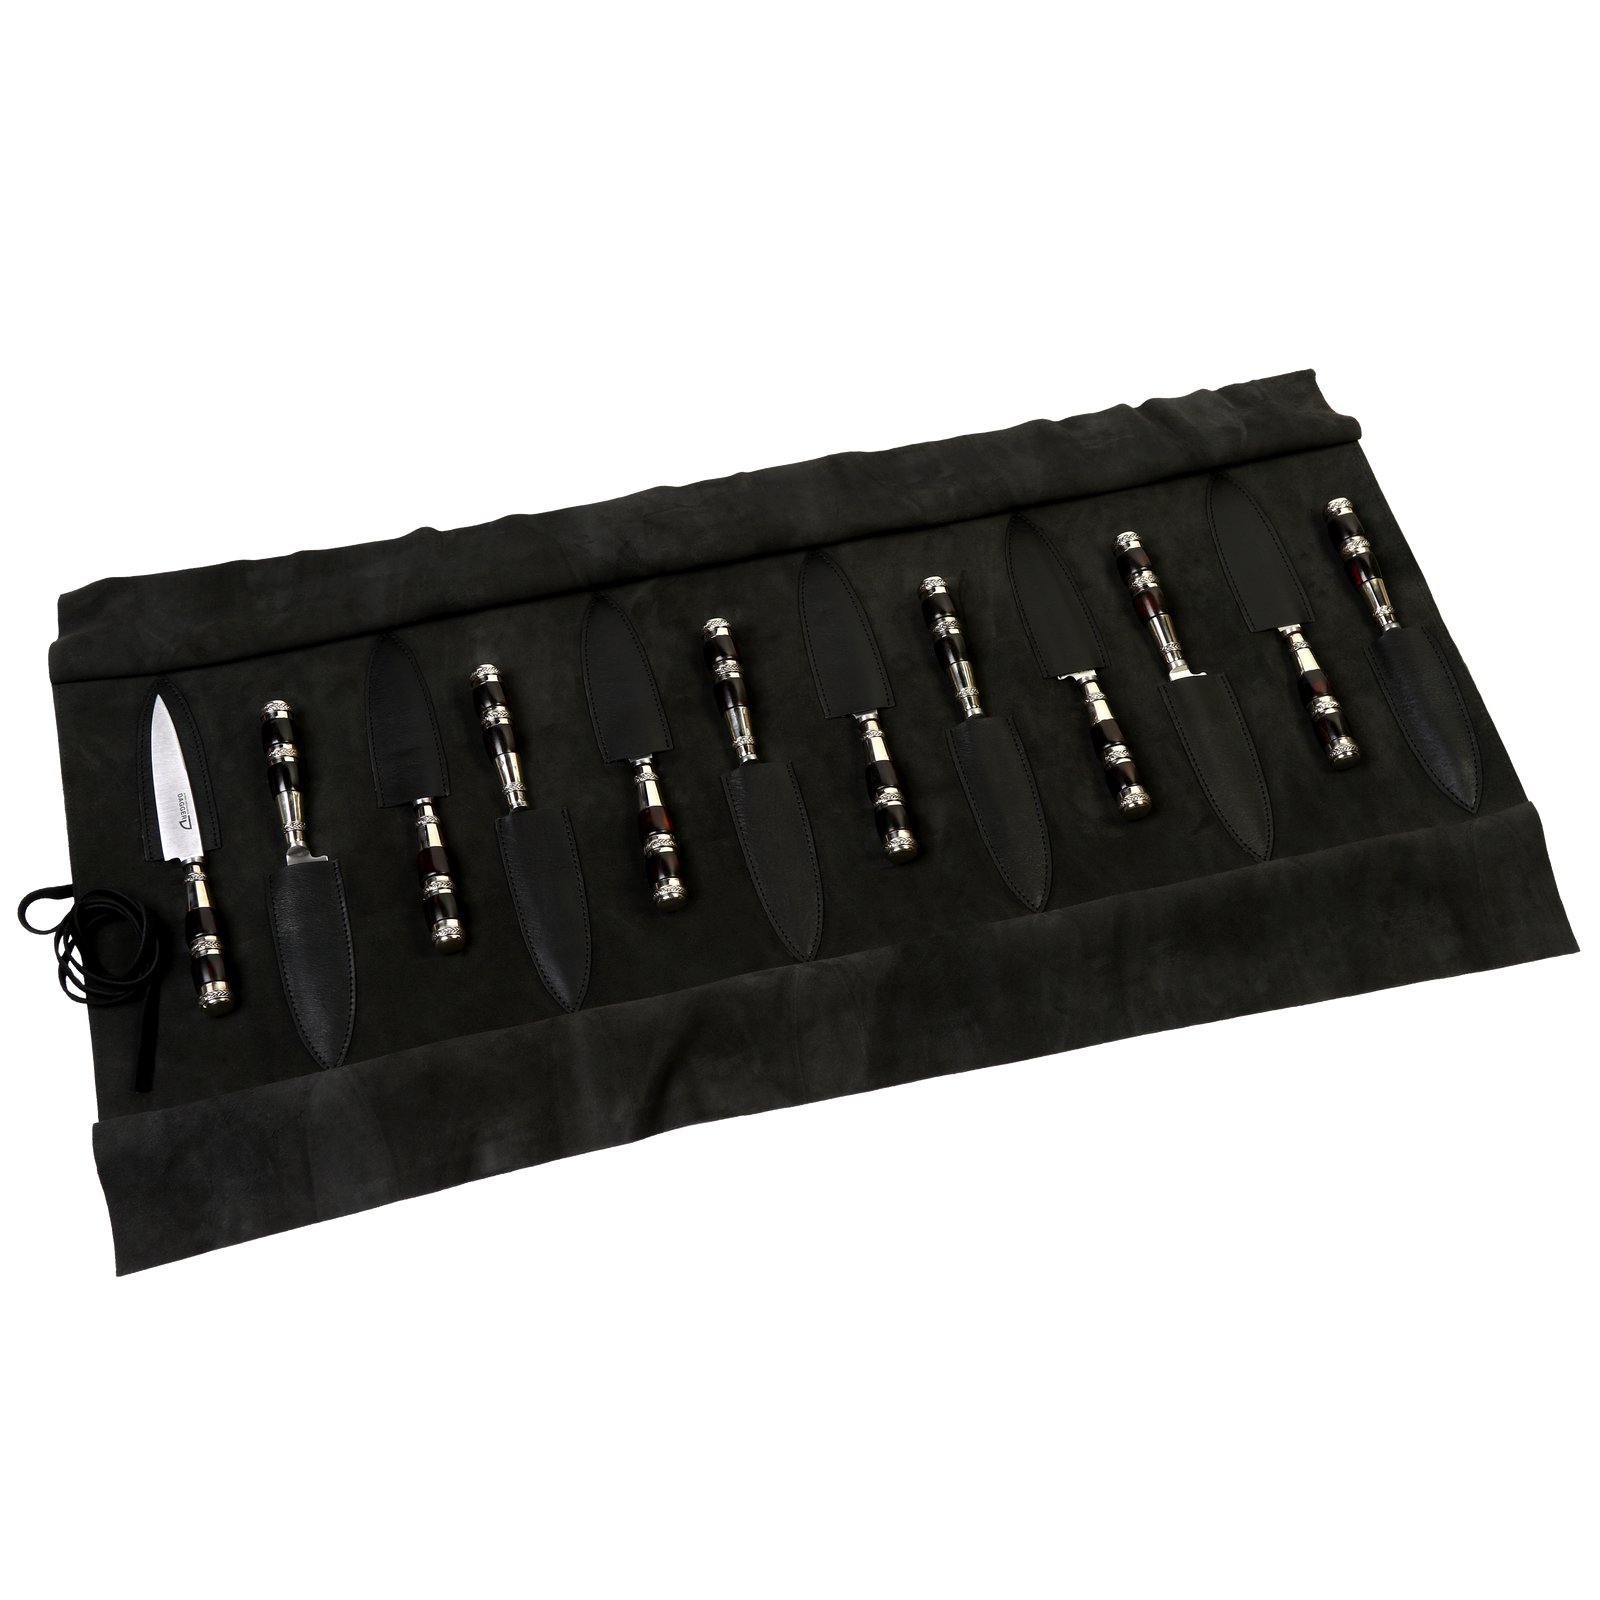 12 Knife Cutlery Set with Black Wood and Nickel Silver Handles